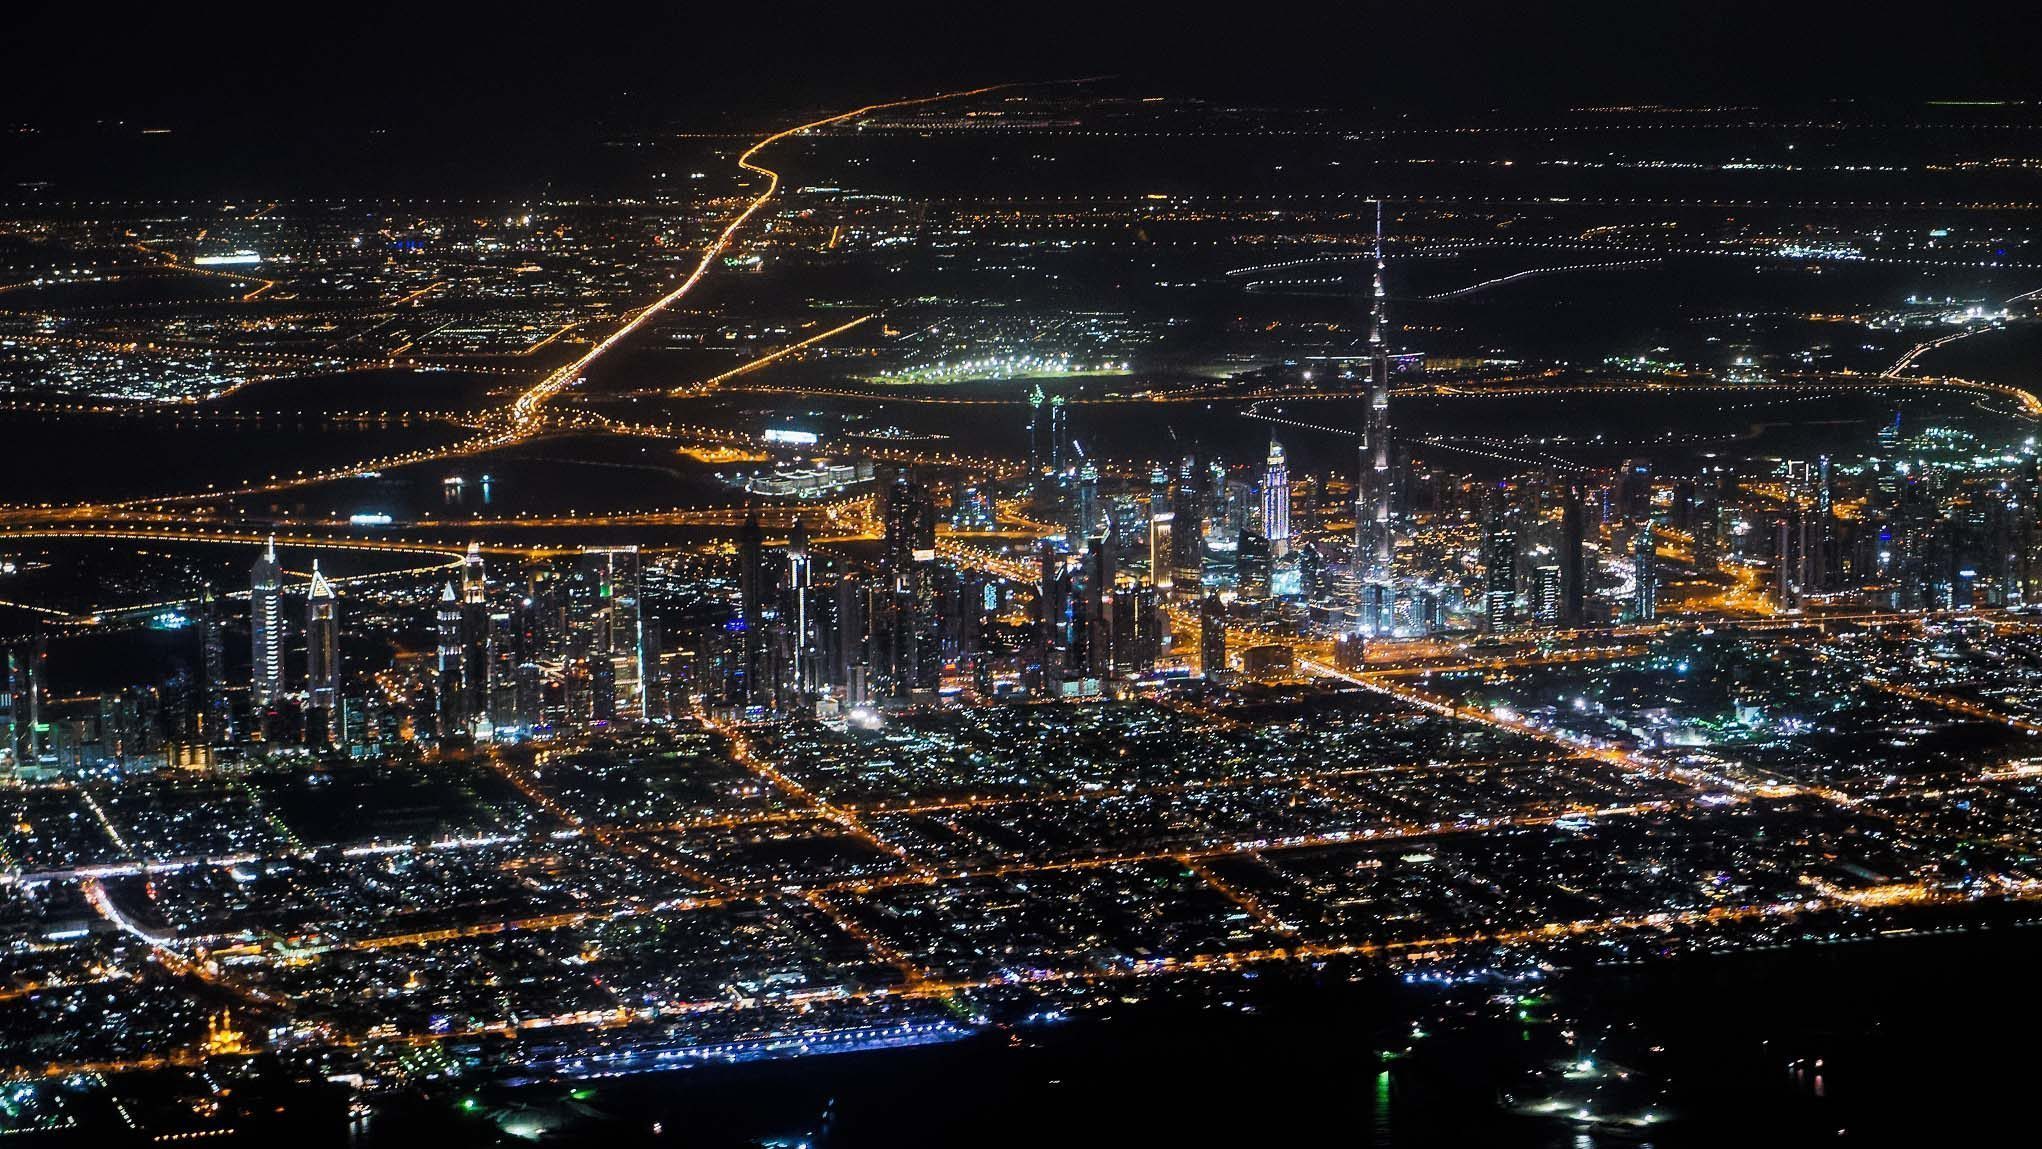 Dubai at night, showing the Burj Khalifa towering over other skyscrapers